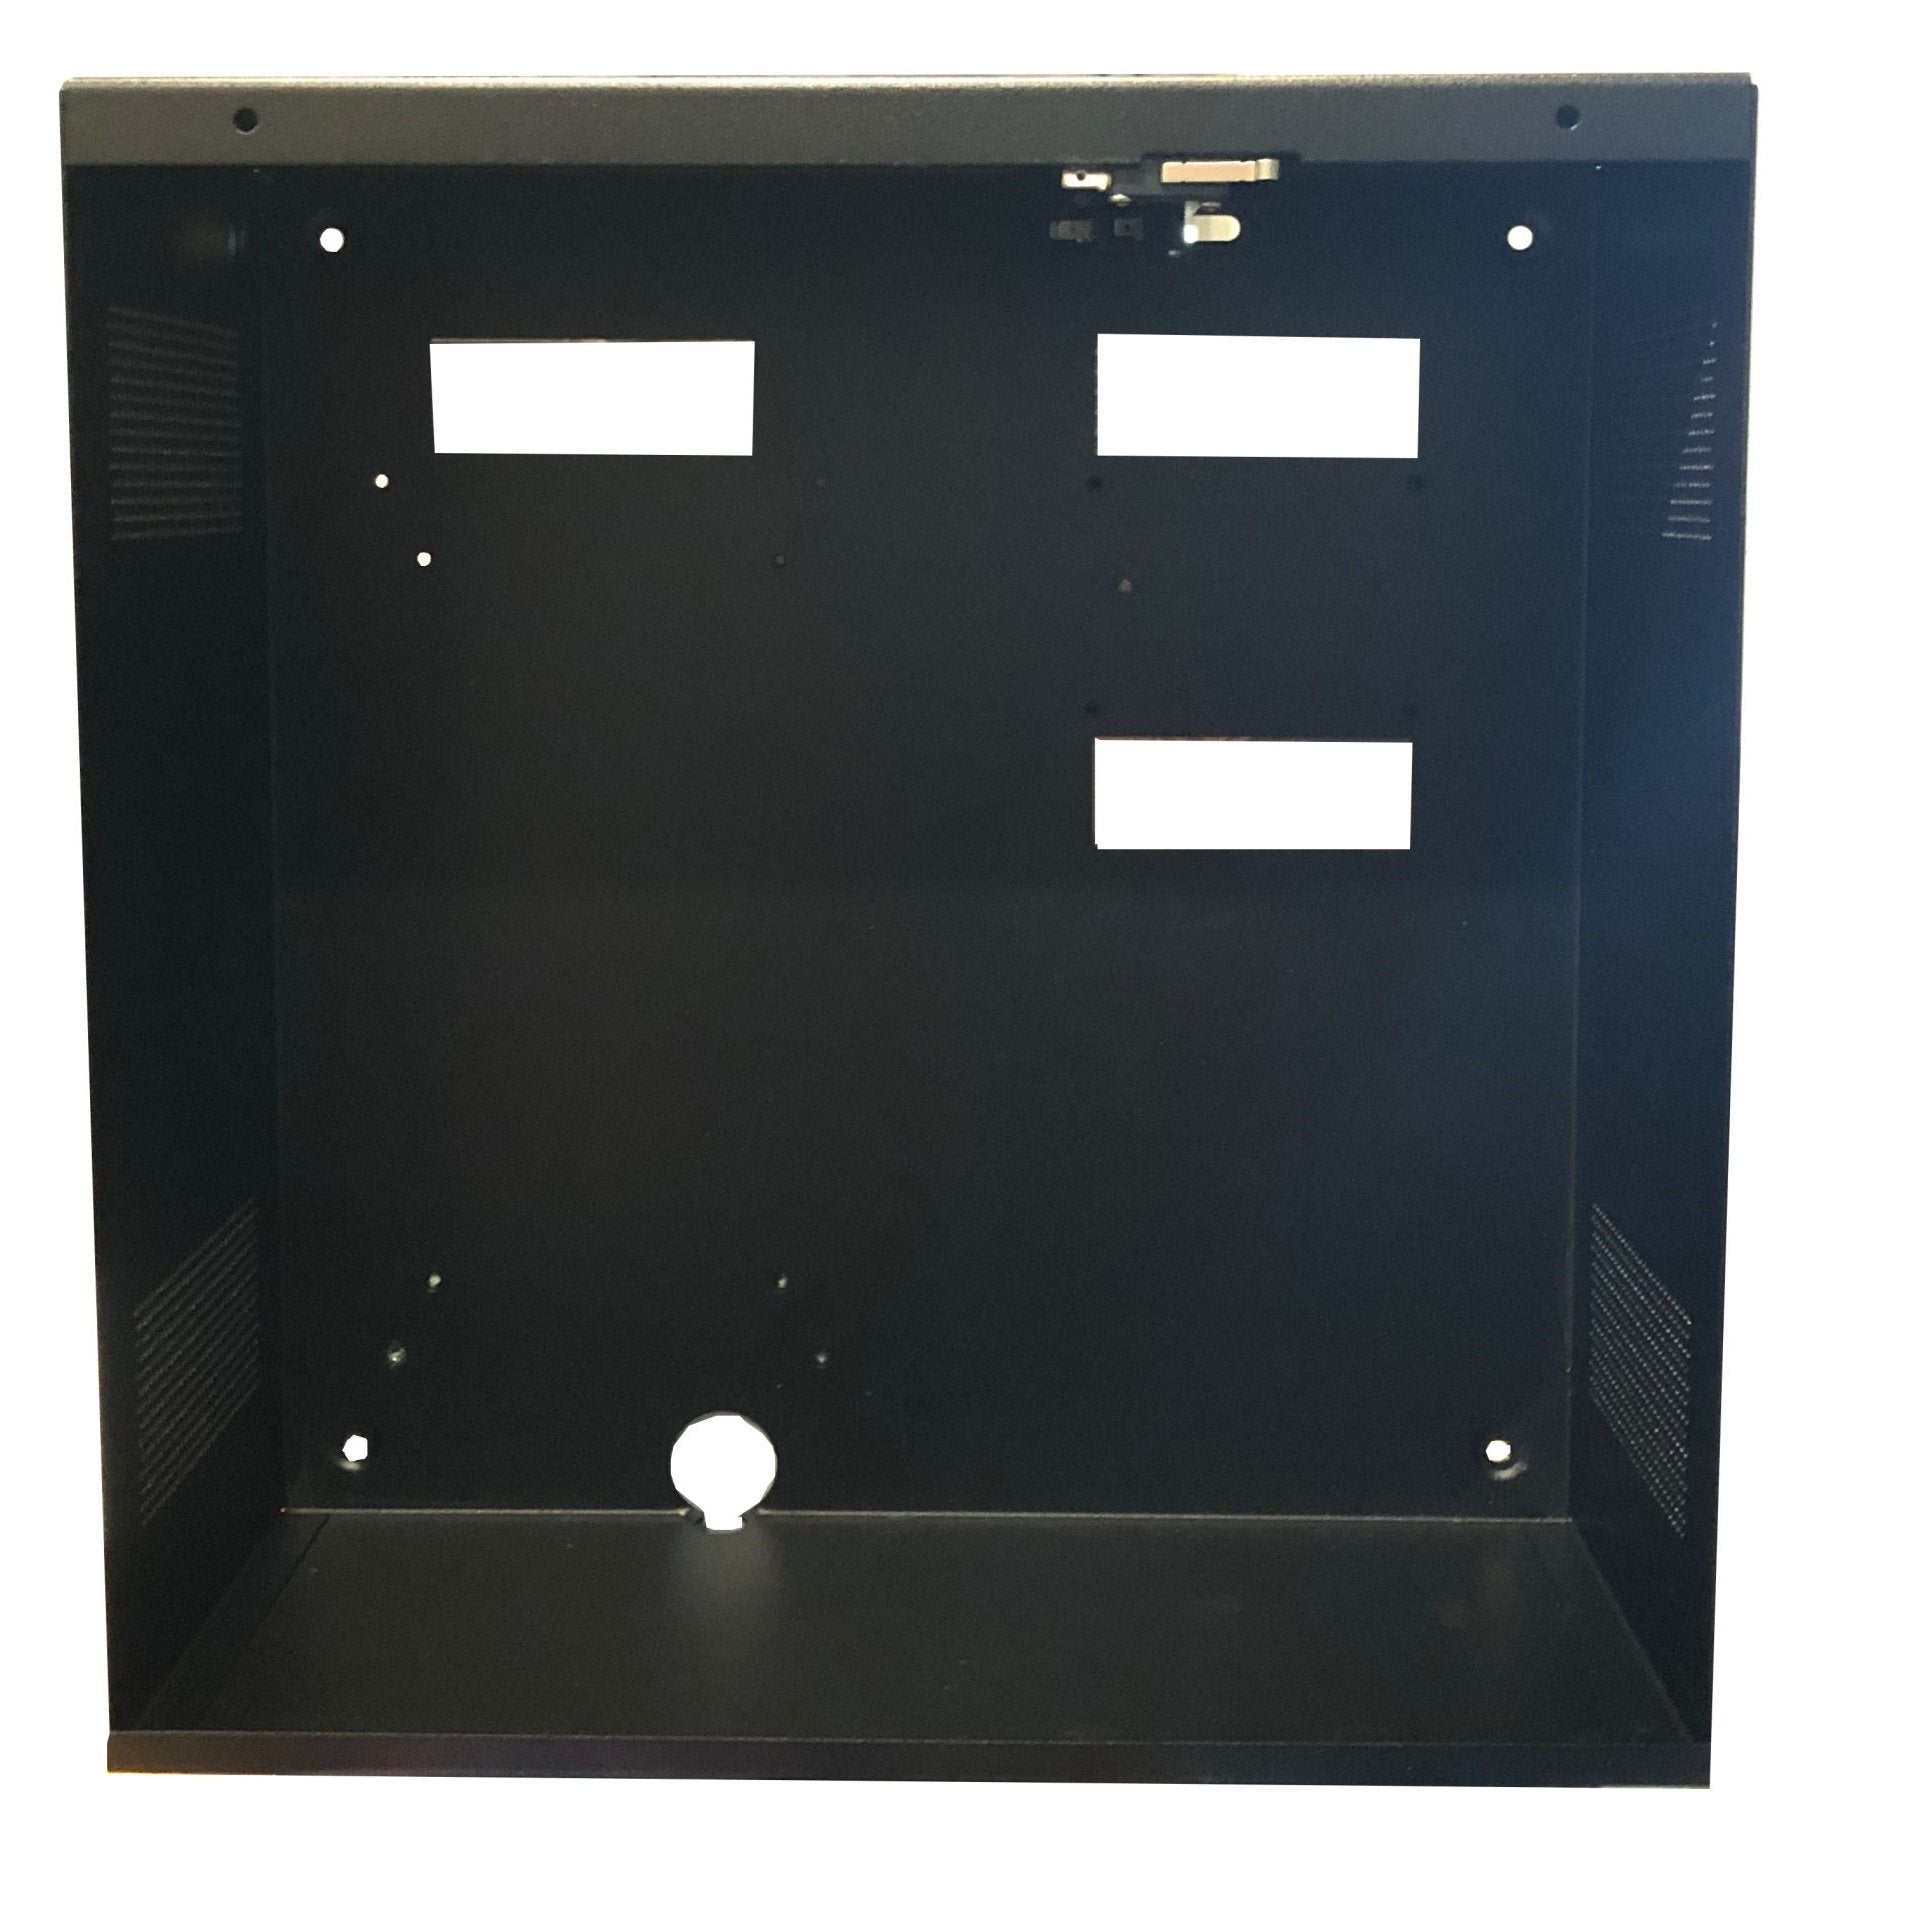 Tactical* 1.1MM Steel Powder Coated Enclosure Dimensions 385W x 404H x 174D MM - Colour Apo Grey - Removable Lid, Will House 5A, 6A Or 10A Power Module, 2 x PDM Modules And Has Space For Up To A 40Ah SLA Battery And Camlock